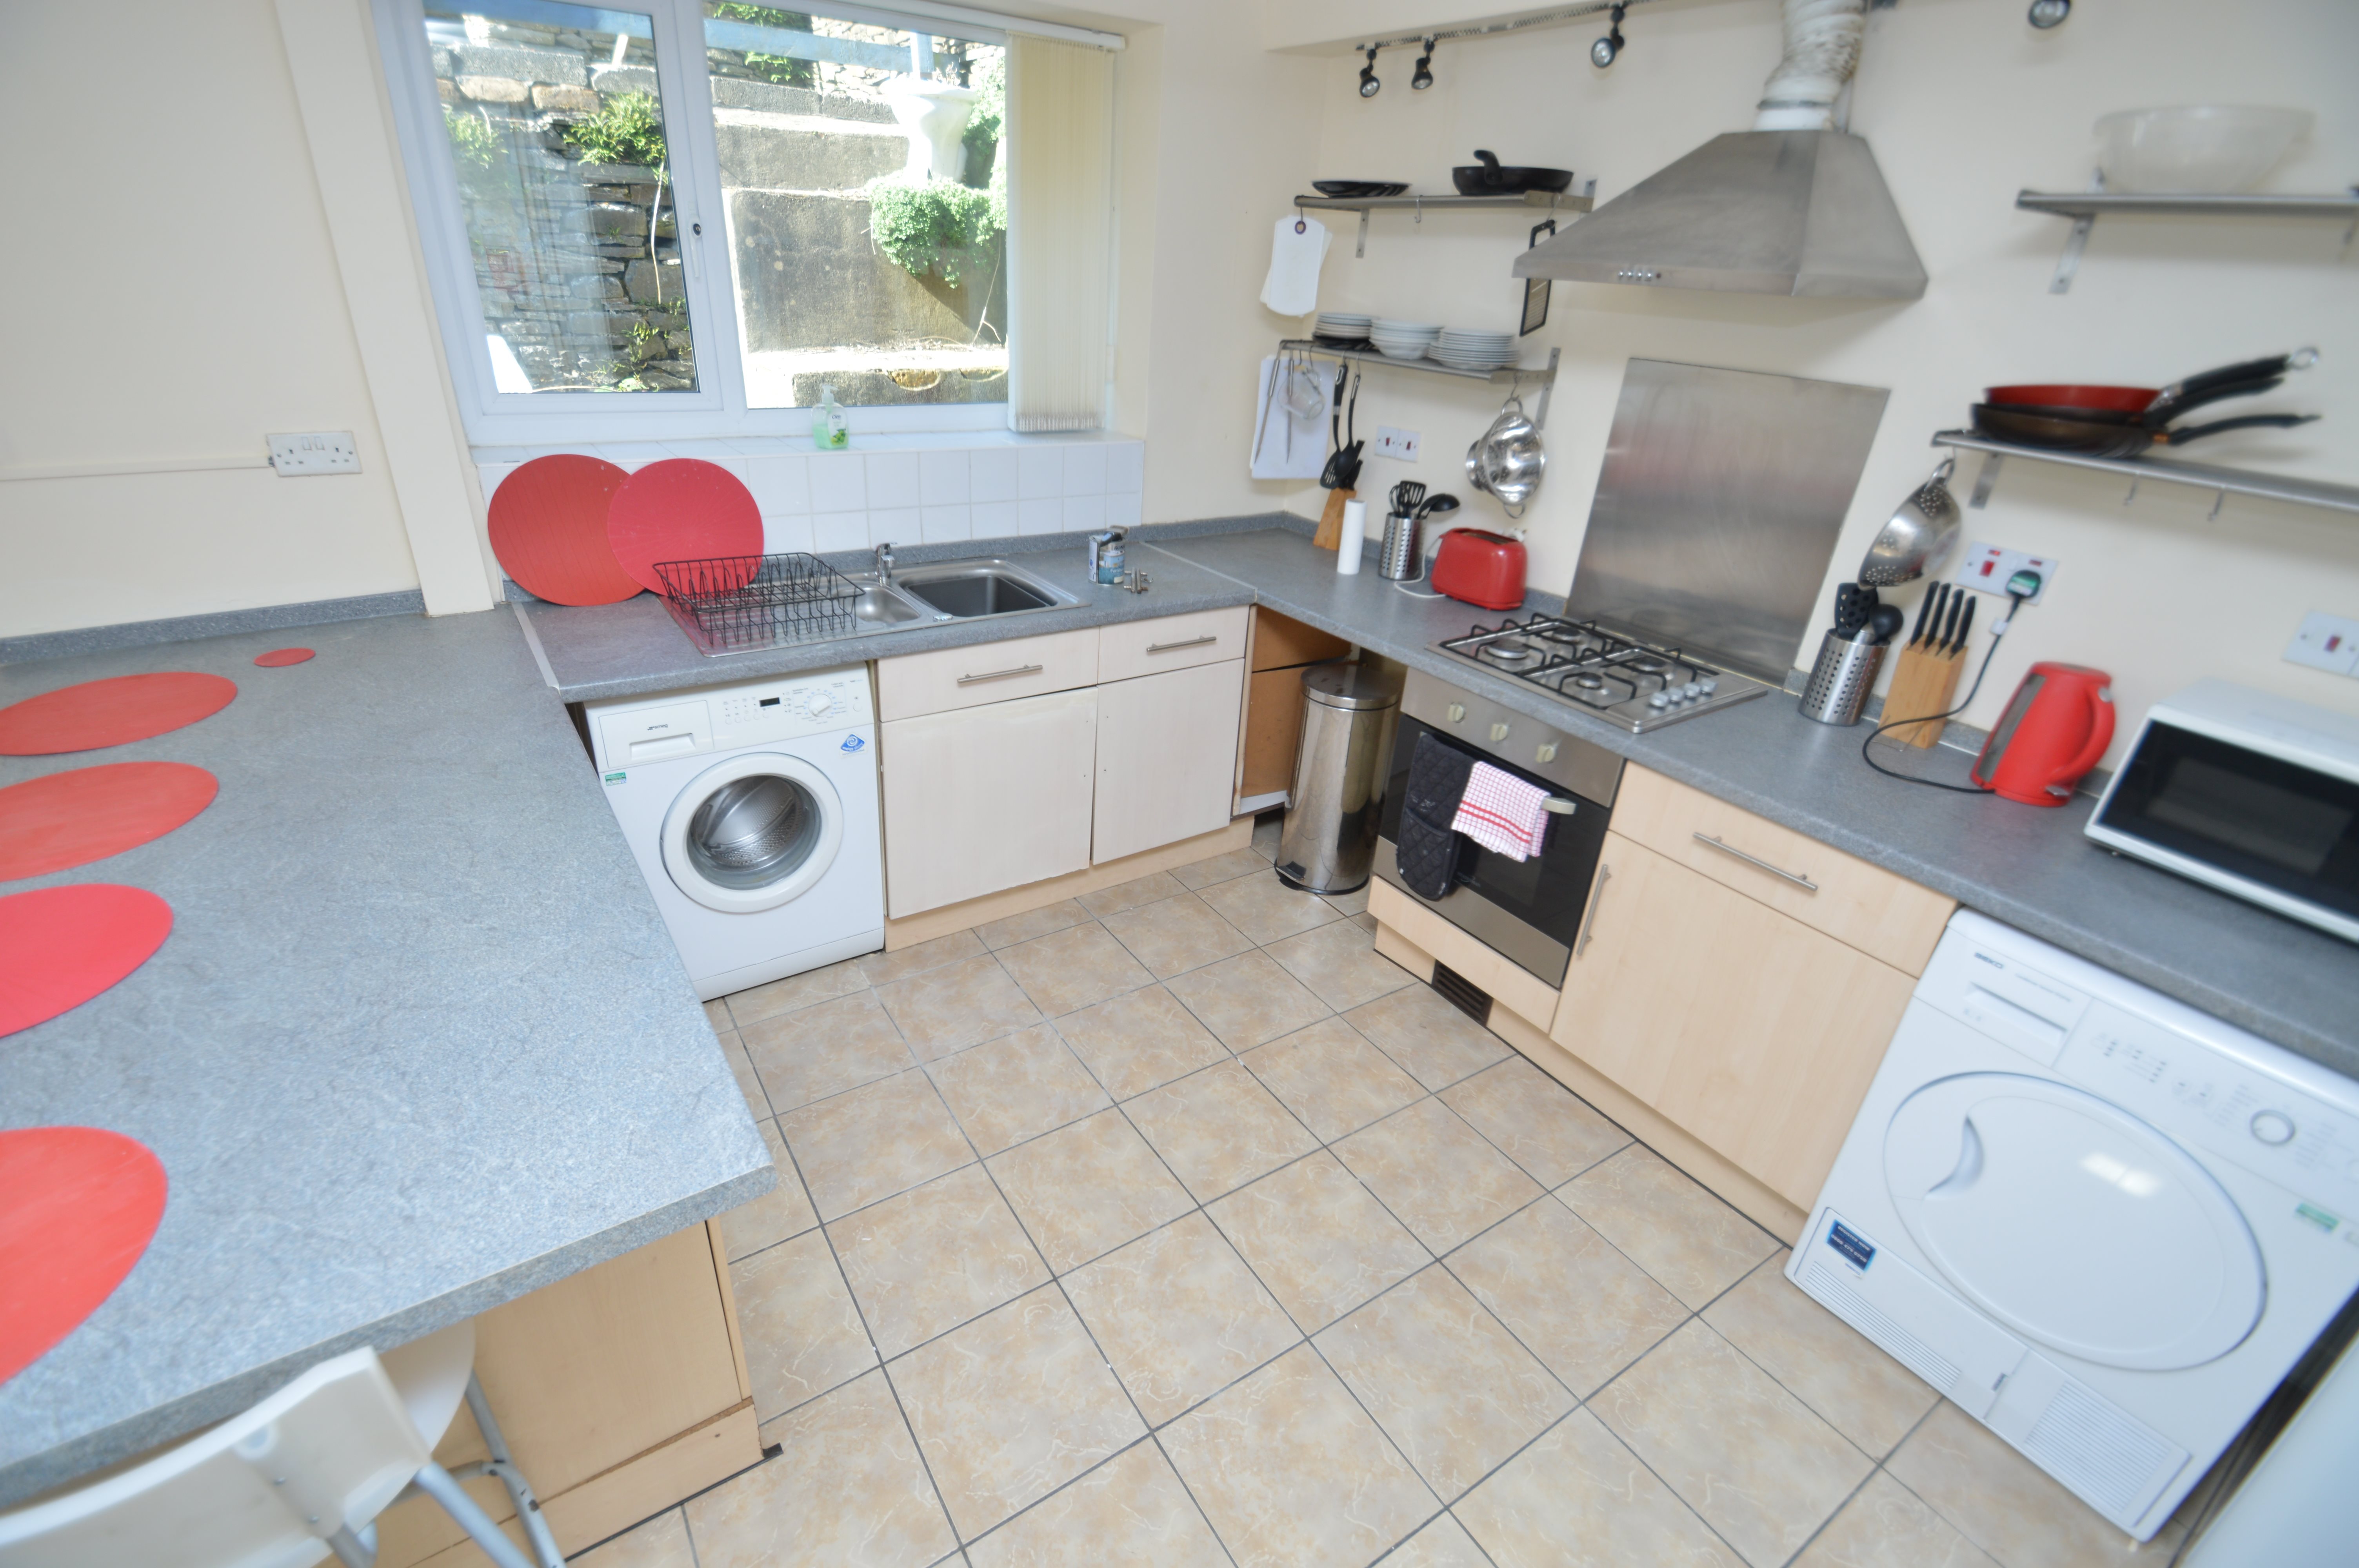 1 bed house / flat share to rent in Wood Road, Treforest  - Property Image 5